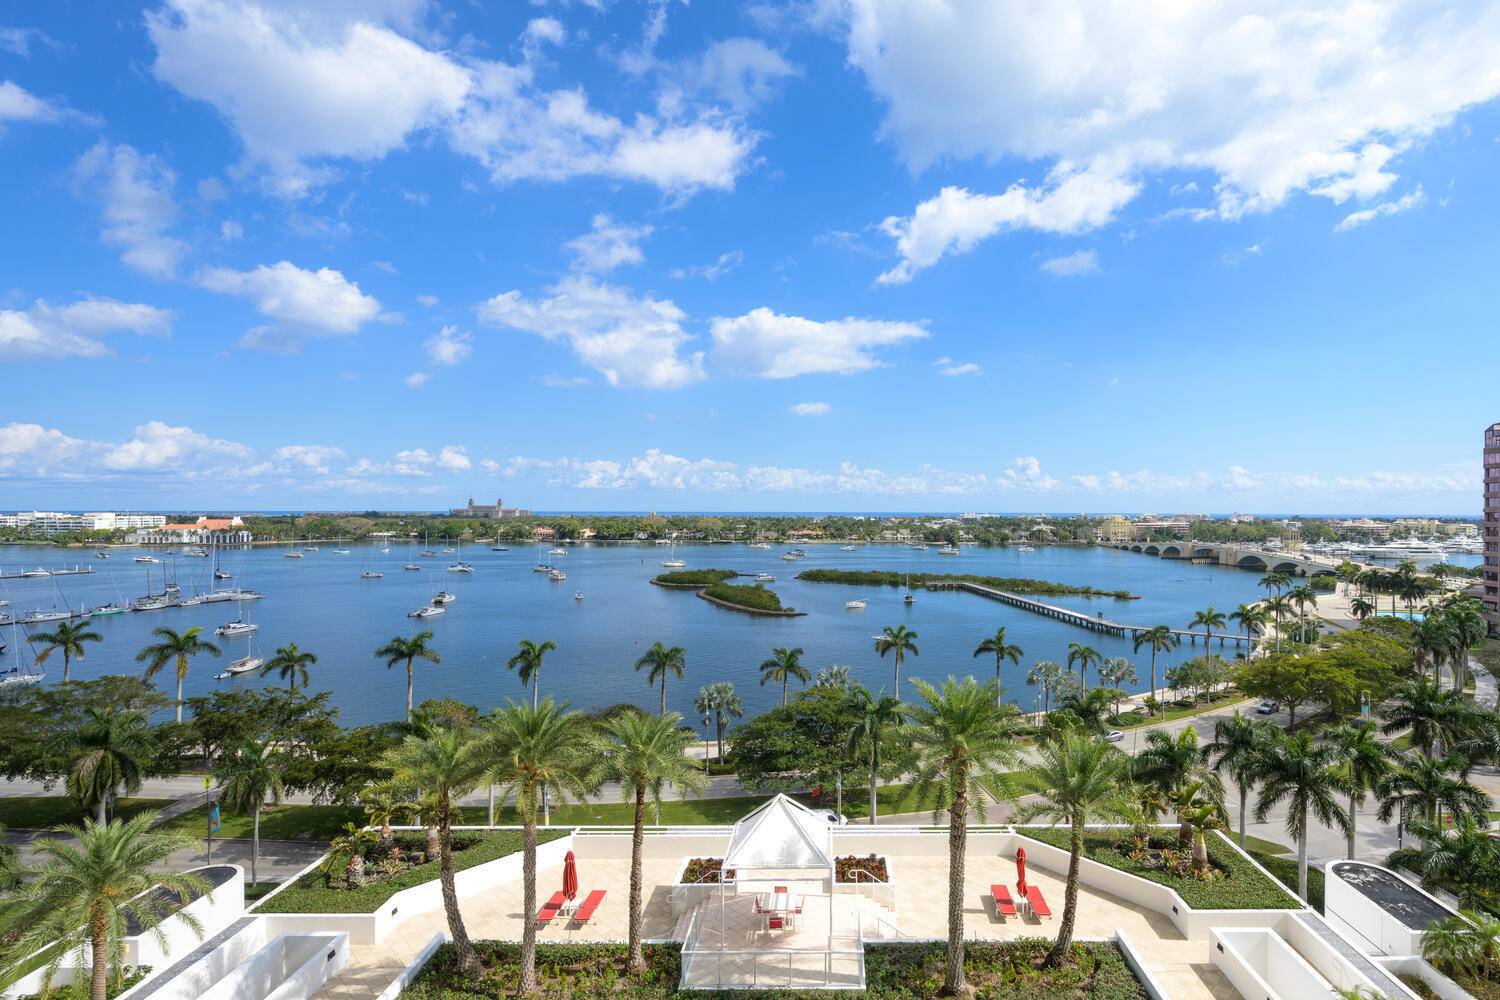 Charming Two bedroom, two bathroom with sweeping views of the Ocean, Intracoastal Waterway, and the Island of Palm Beach.